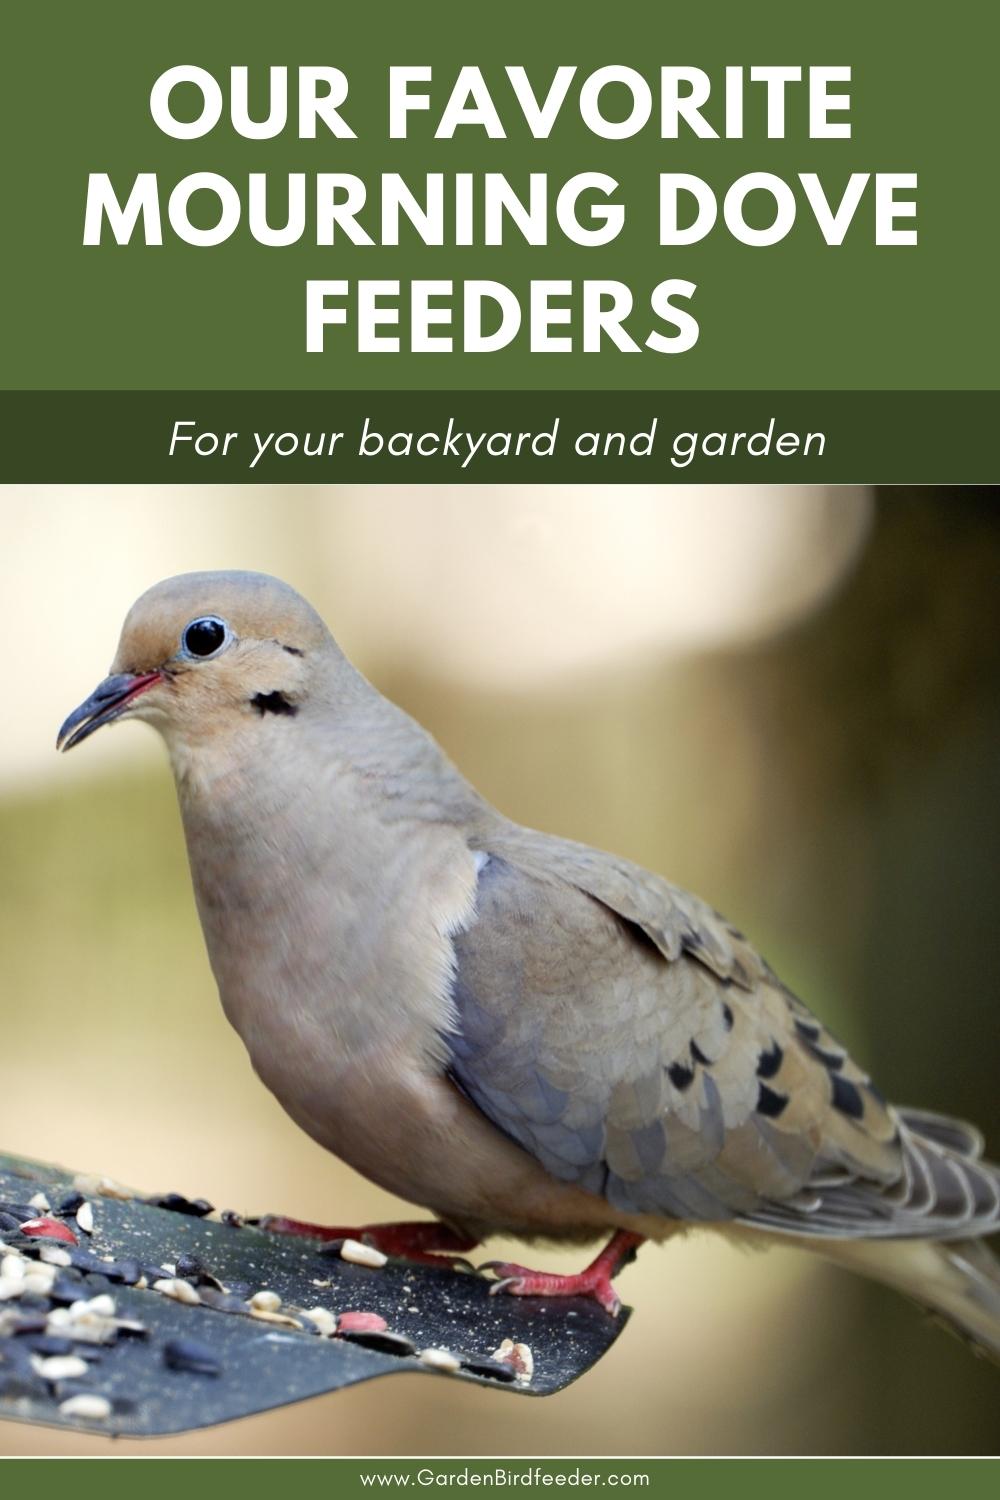 Our Favorite Mourning Dove Feeders - Pinterest Pin